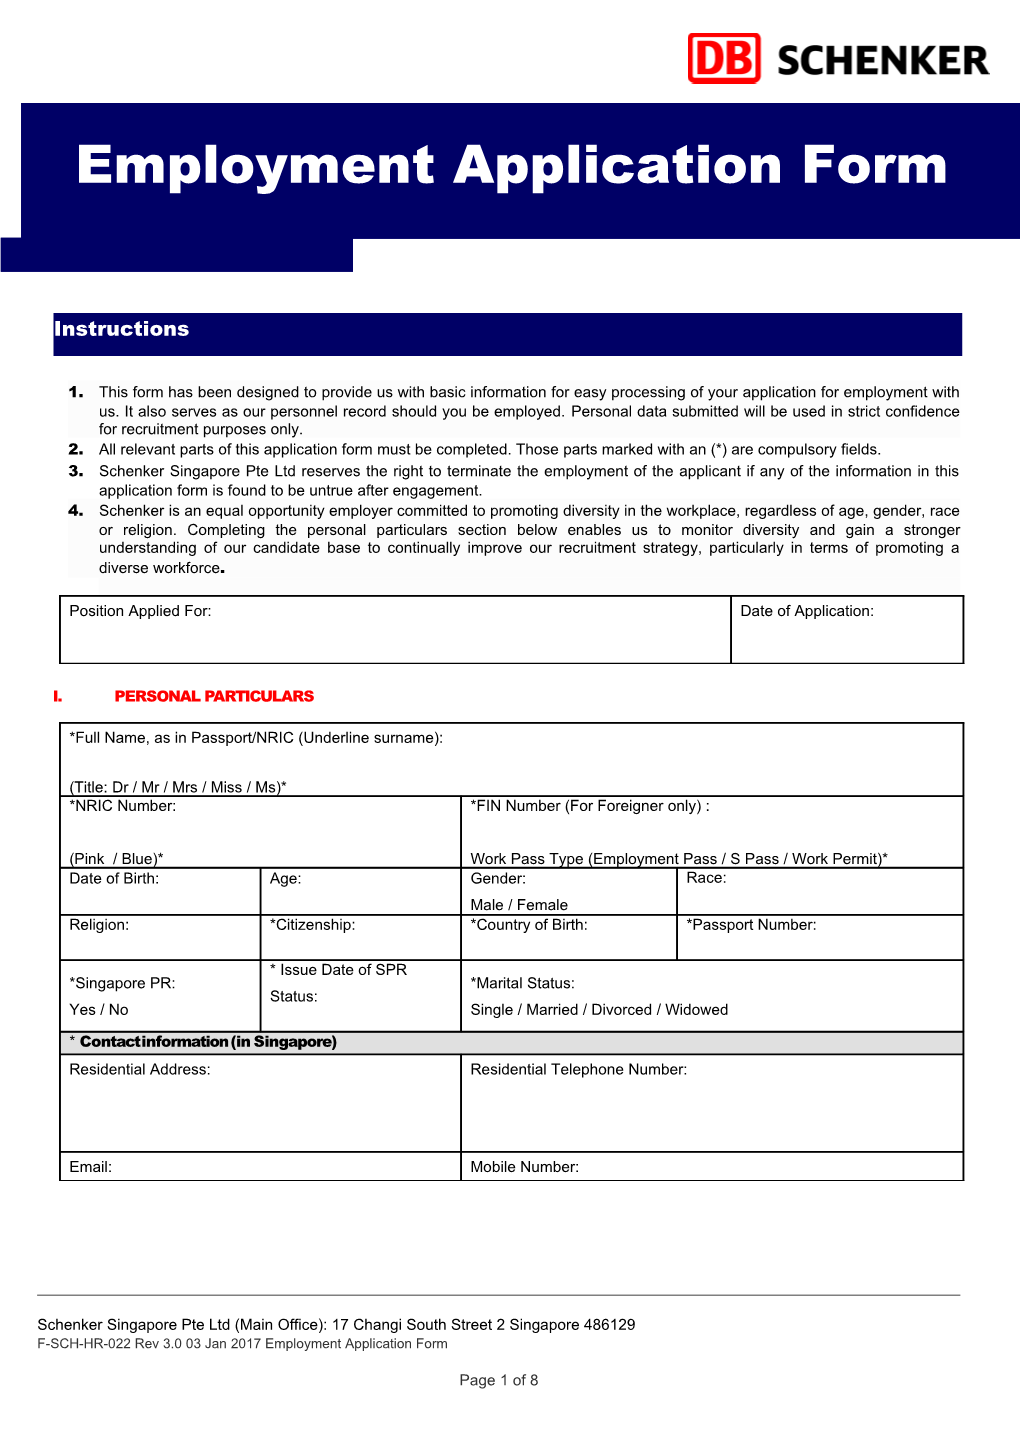 1. This Form Has Been Designed to Provide Us with Basic Information for Easy Processing